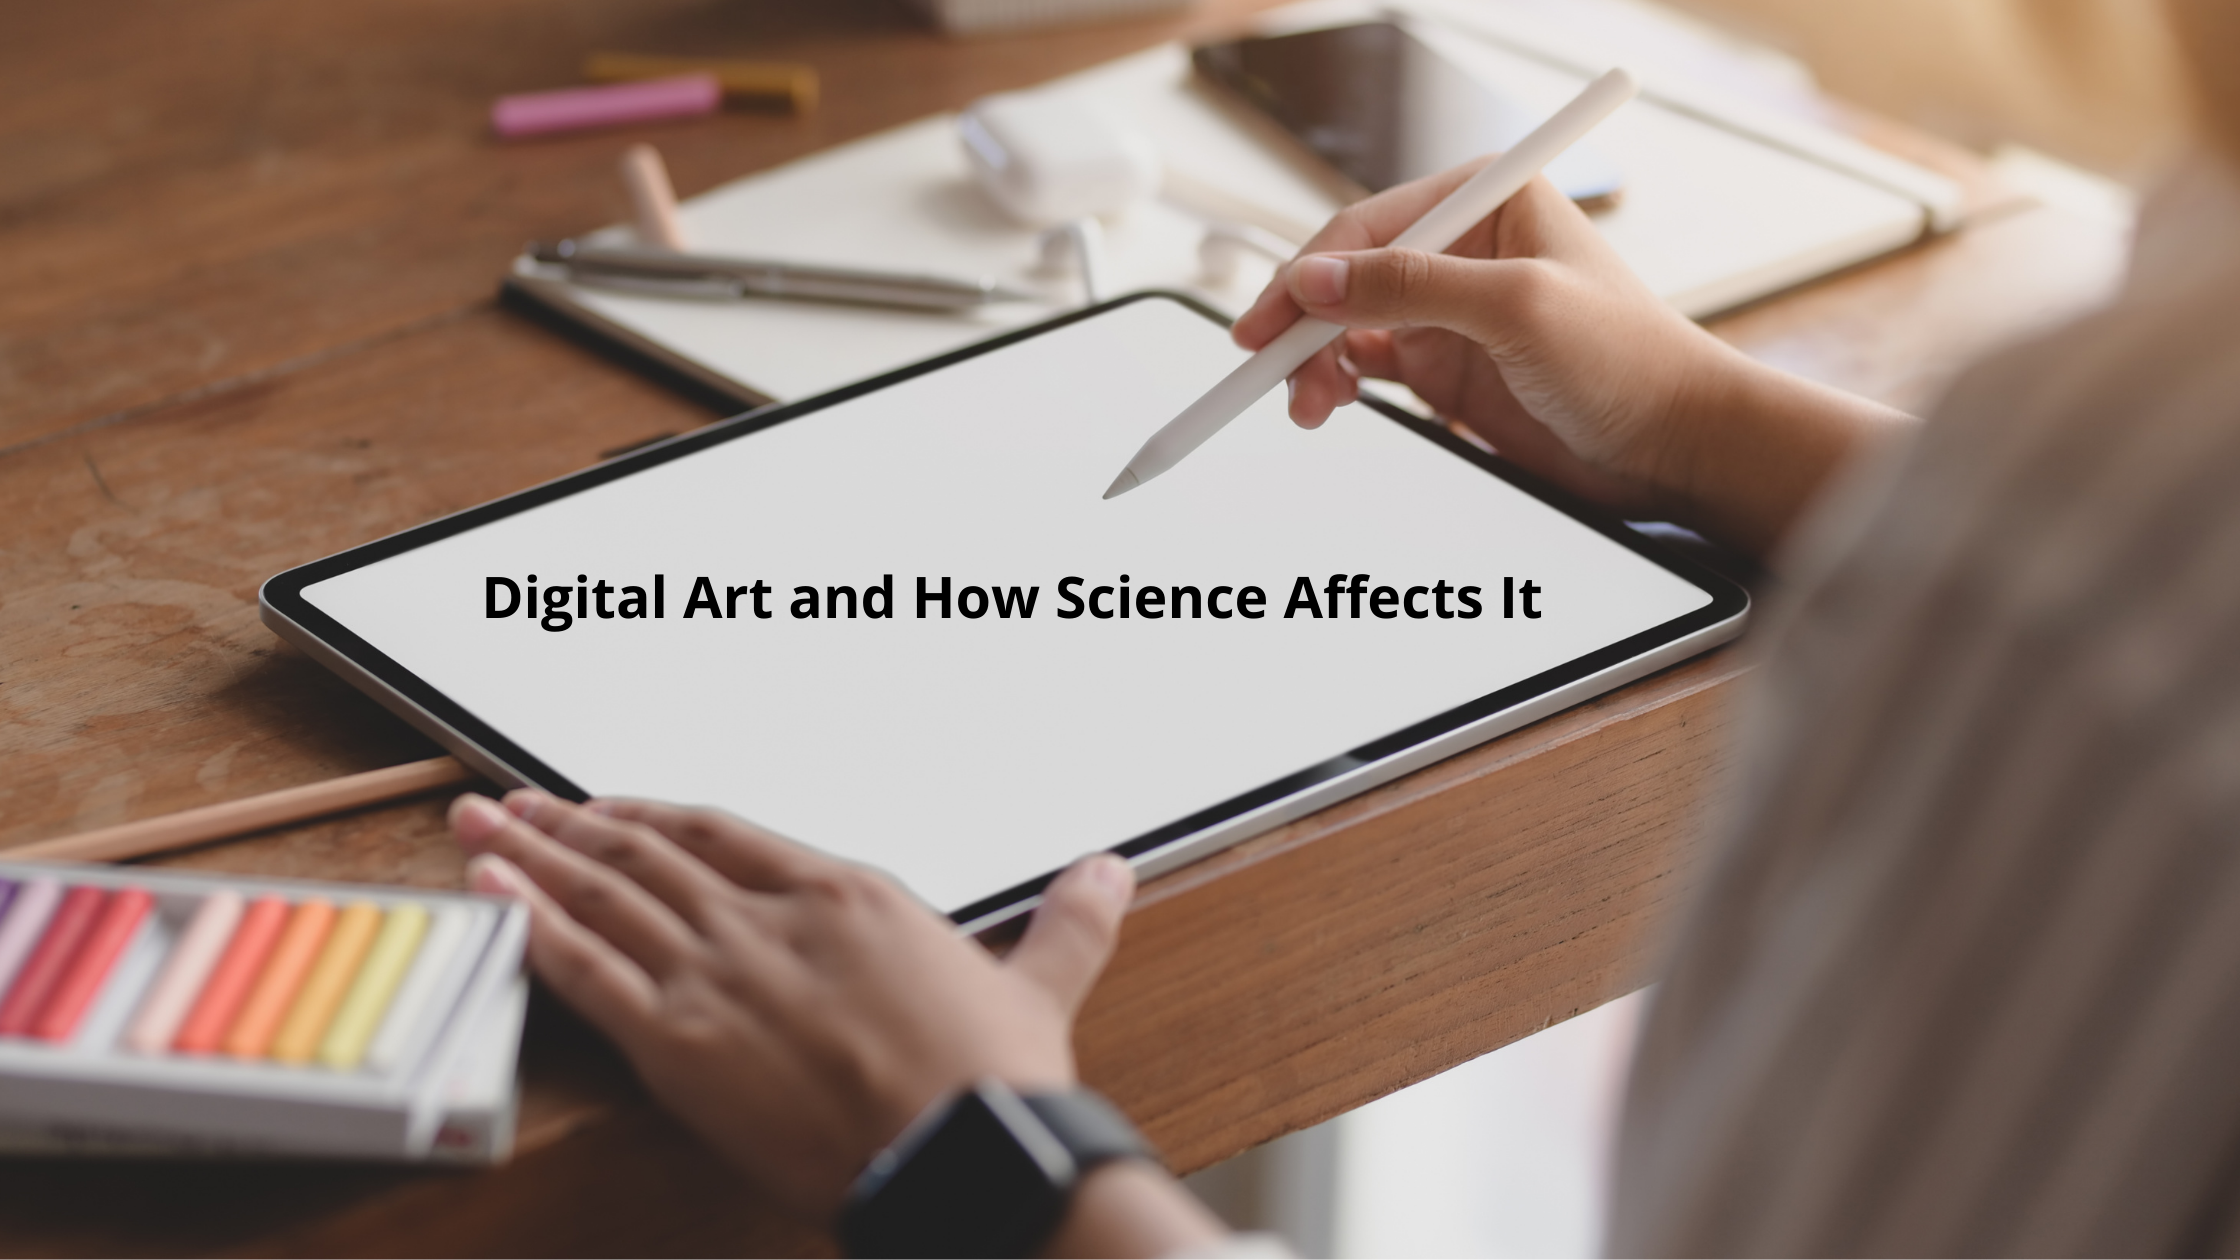 Digital Art and How Science Affects It